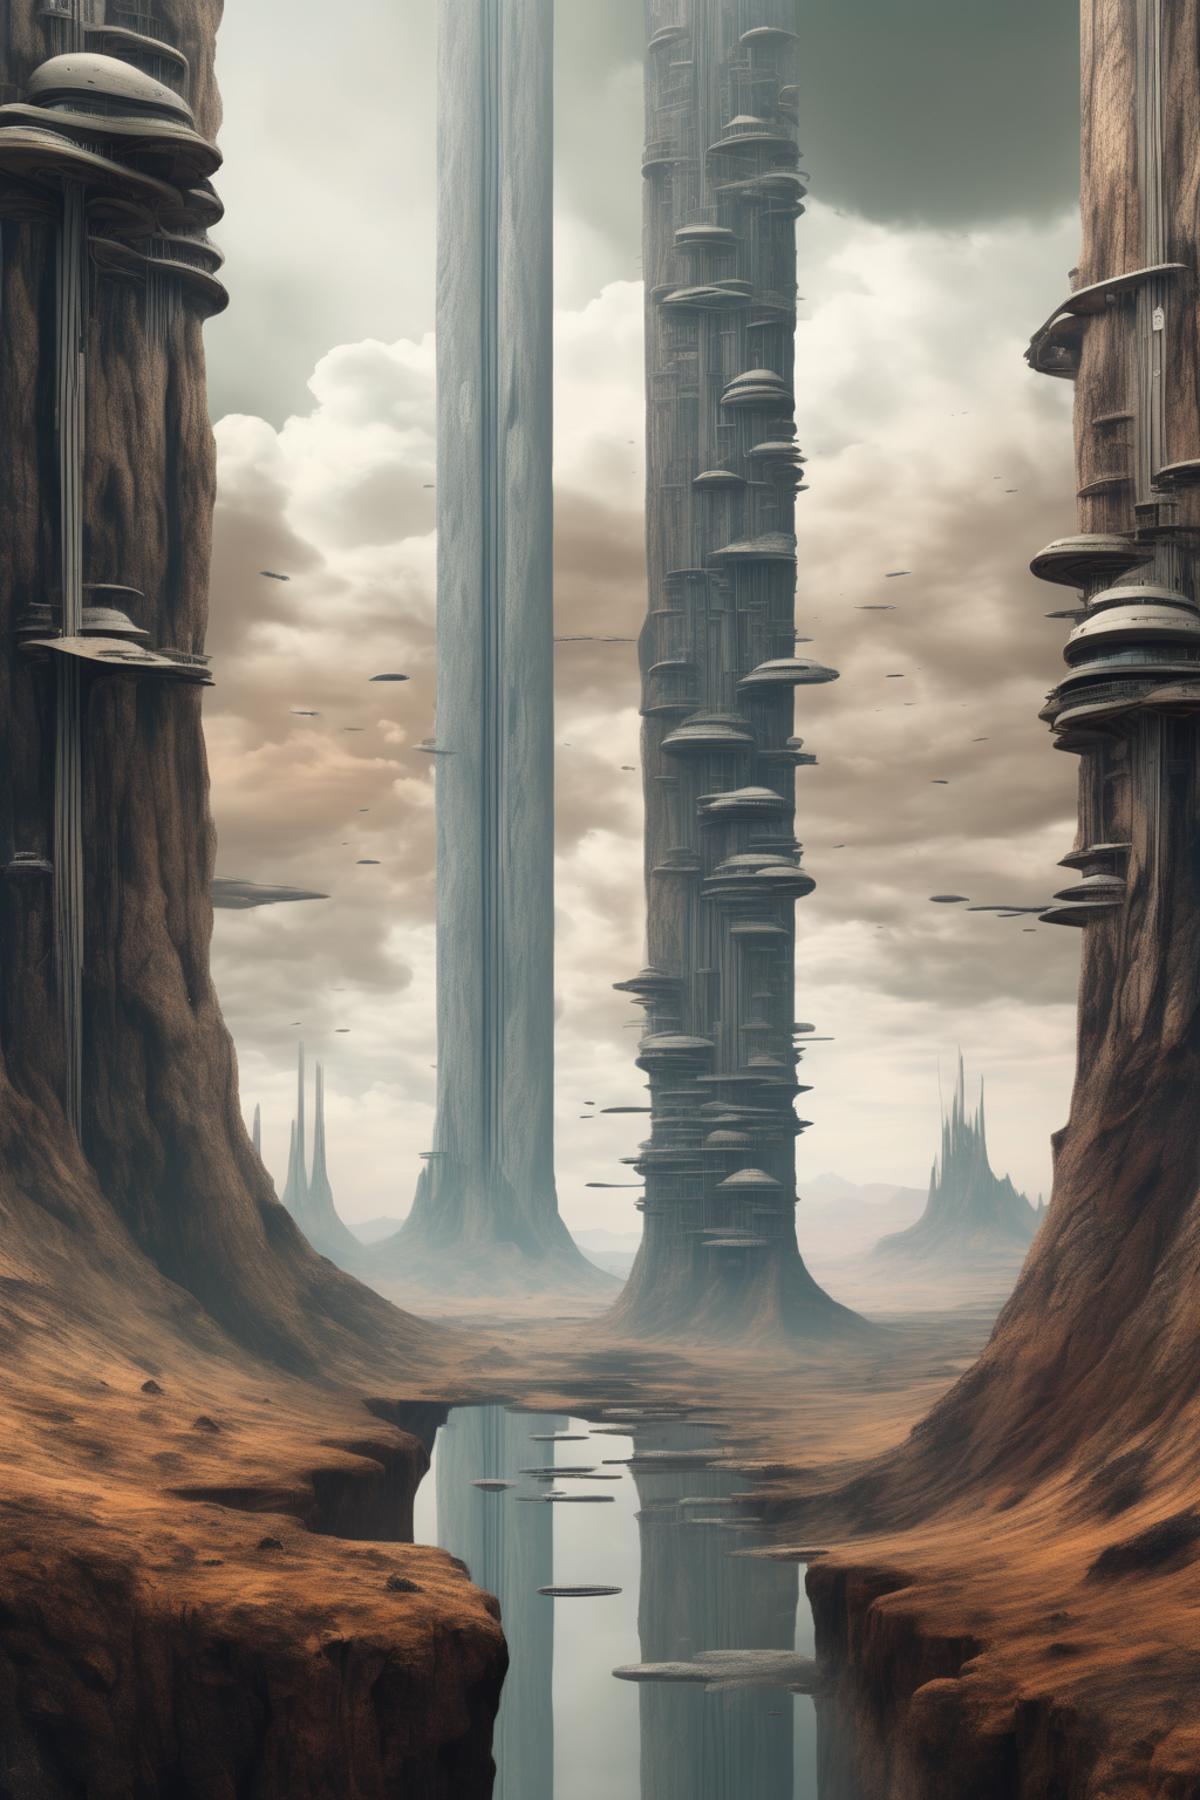 Vertical Landscapes image by Kappa_Neuro